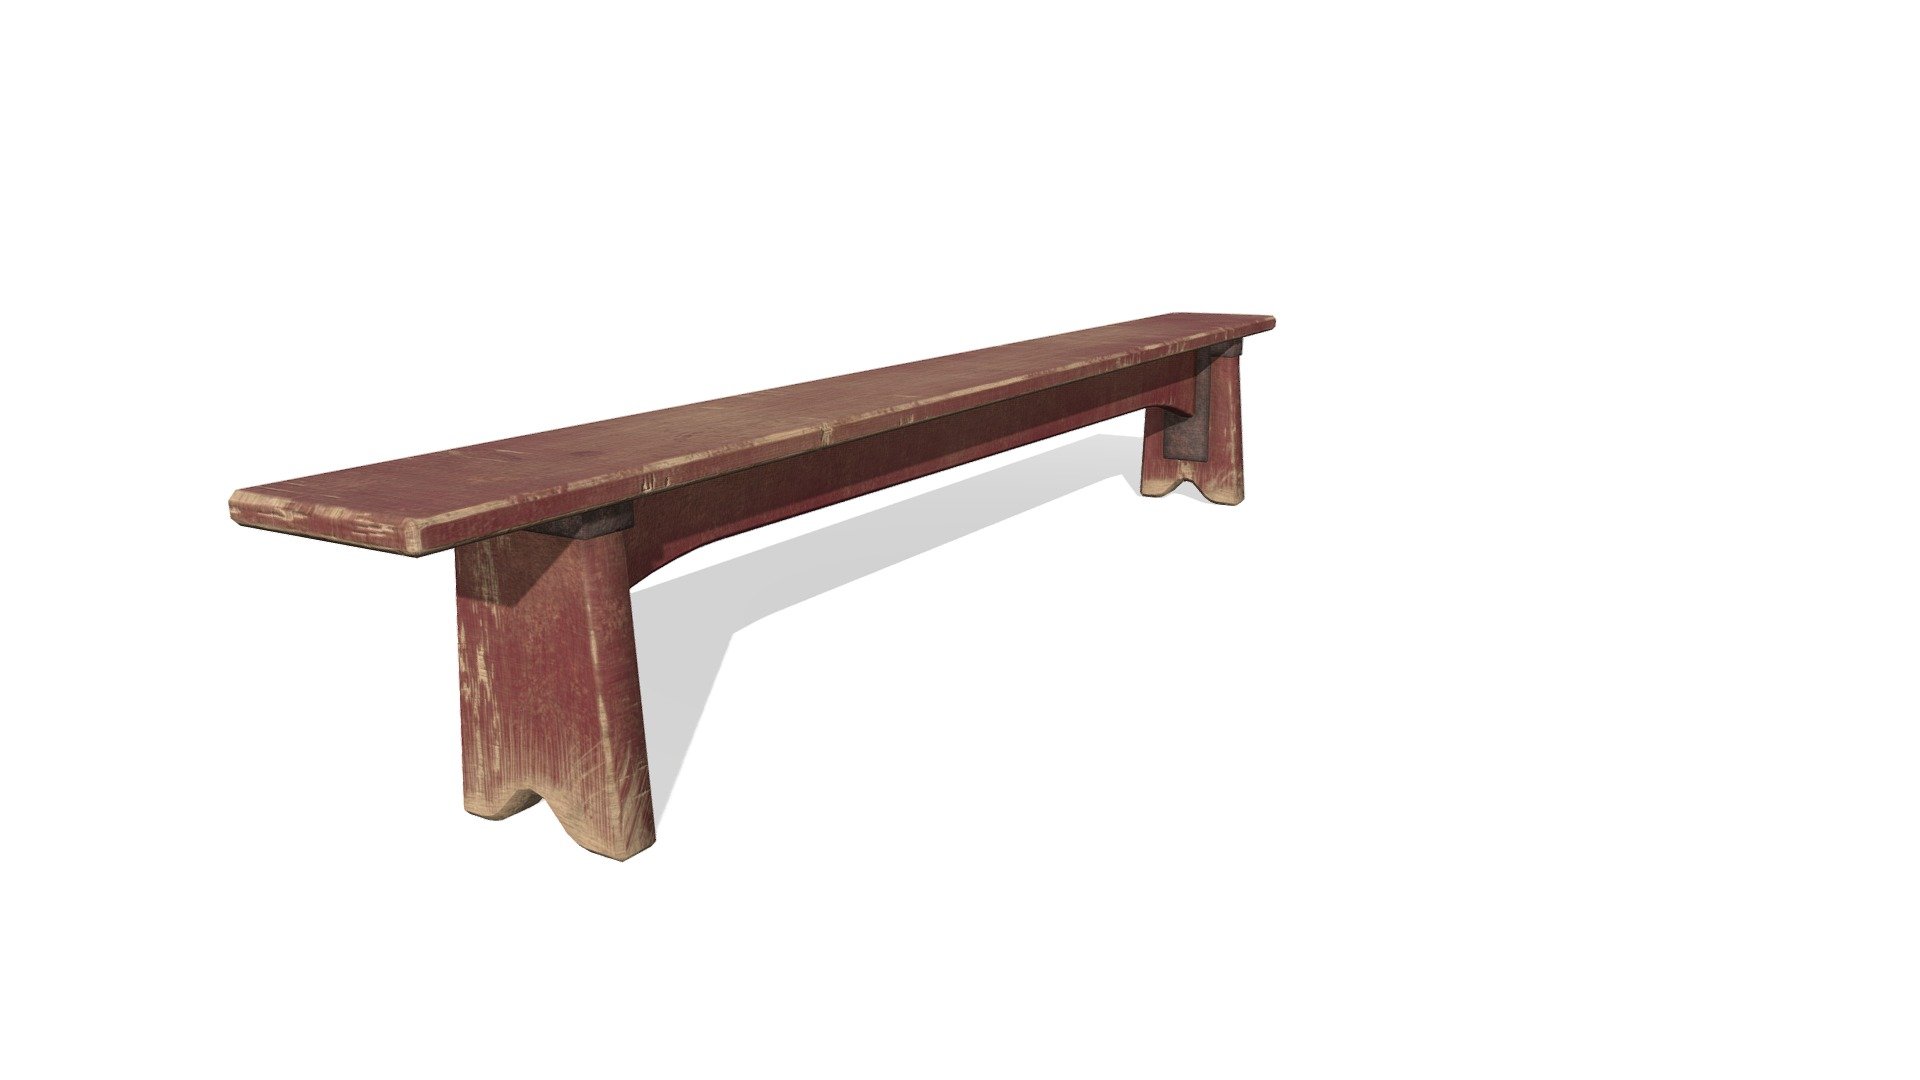 Based on the Half-Life 2 cafeteria bench model

Comes with a tint mask texture so you can easily change the color of the paint.

Modeled in Blender, textured in Substance Painter - Low Poly Old Red Painted Wooden Bench - Download Free 3D model by Kuutti Siitonen (@kuuttisiitonen) 3d model